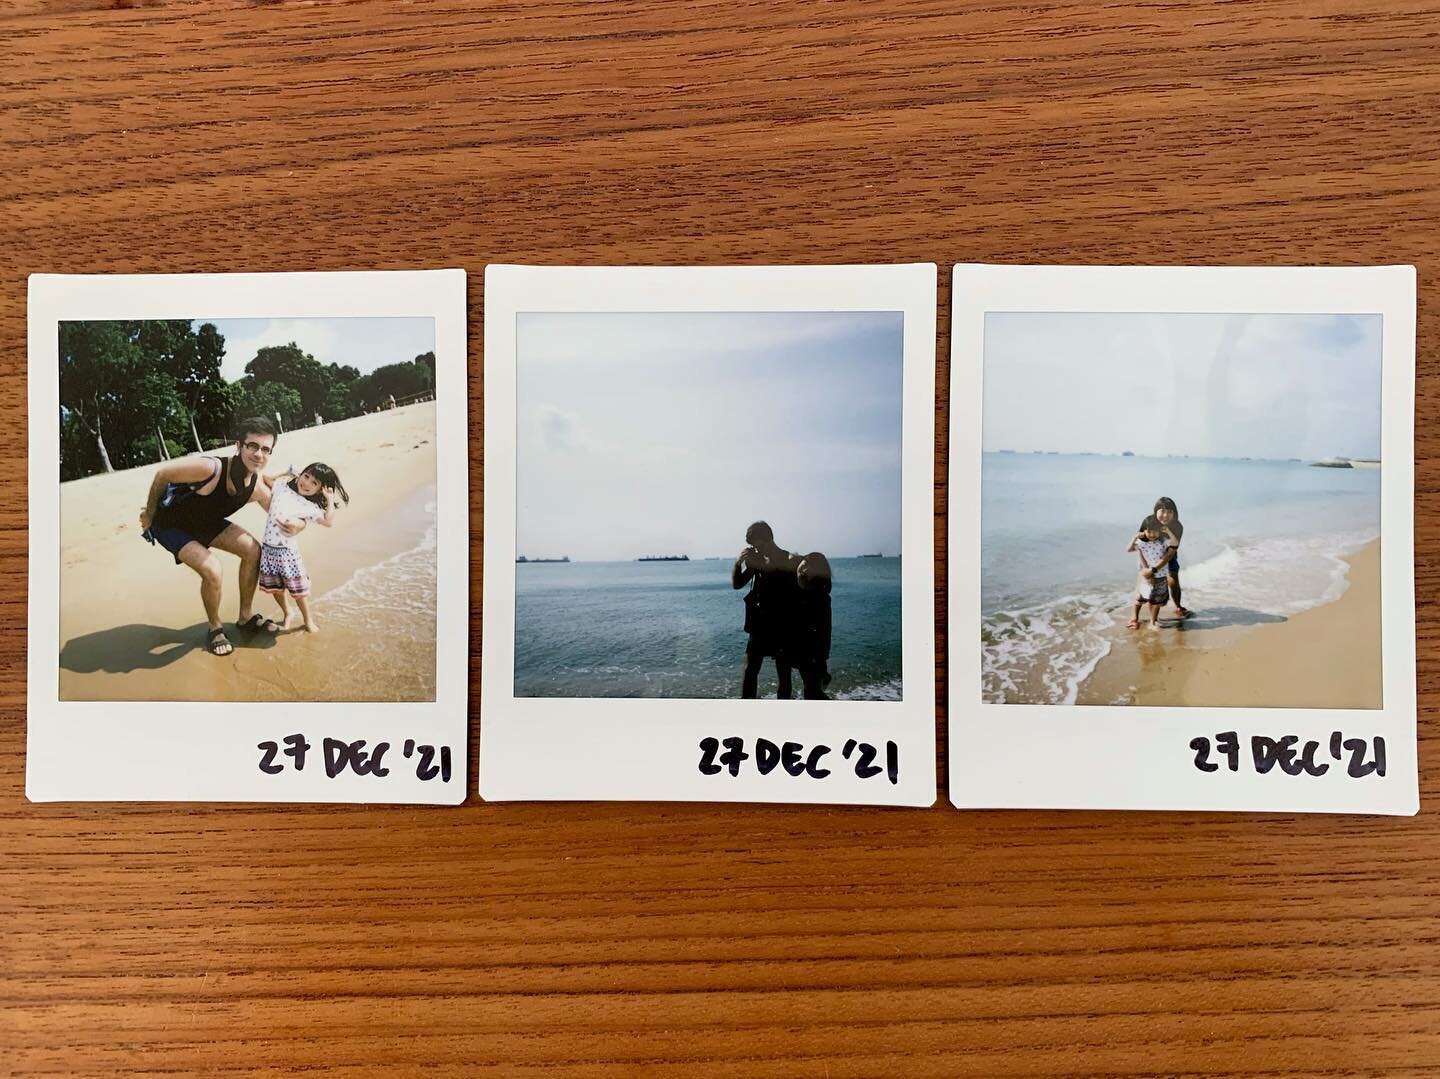 Our morning by the sea&hellip; #eastcoastpark #singapore #fujifilminstax